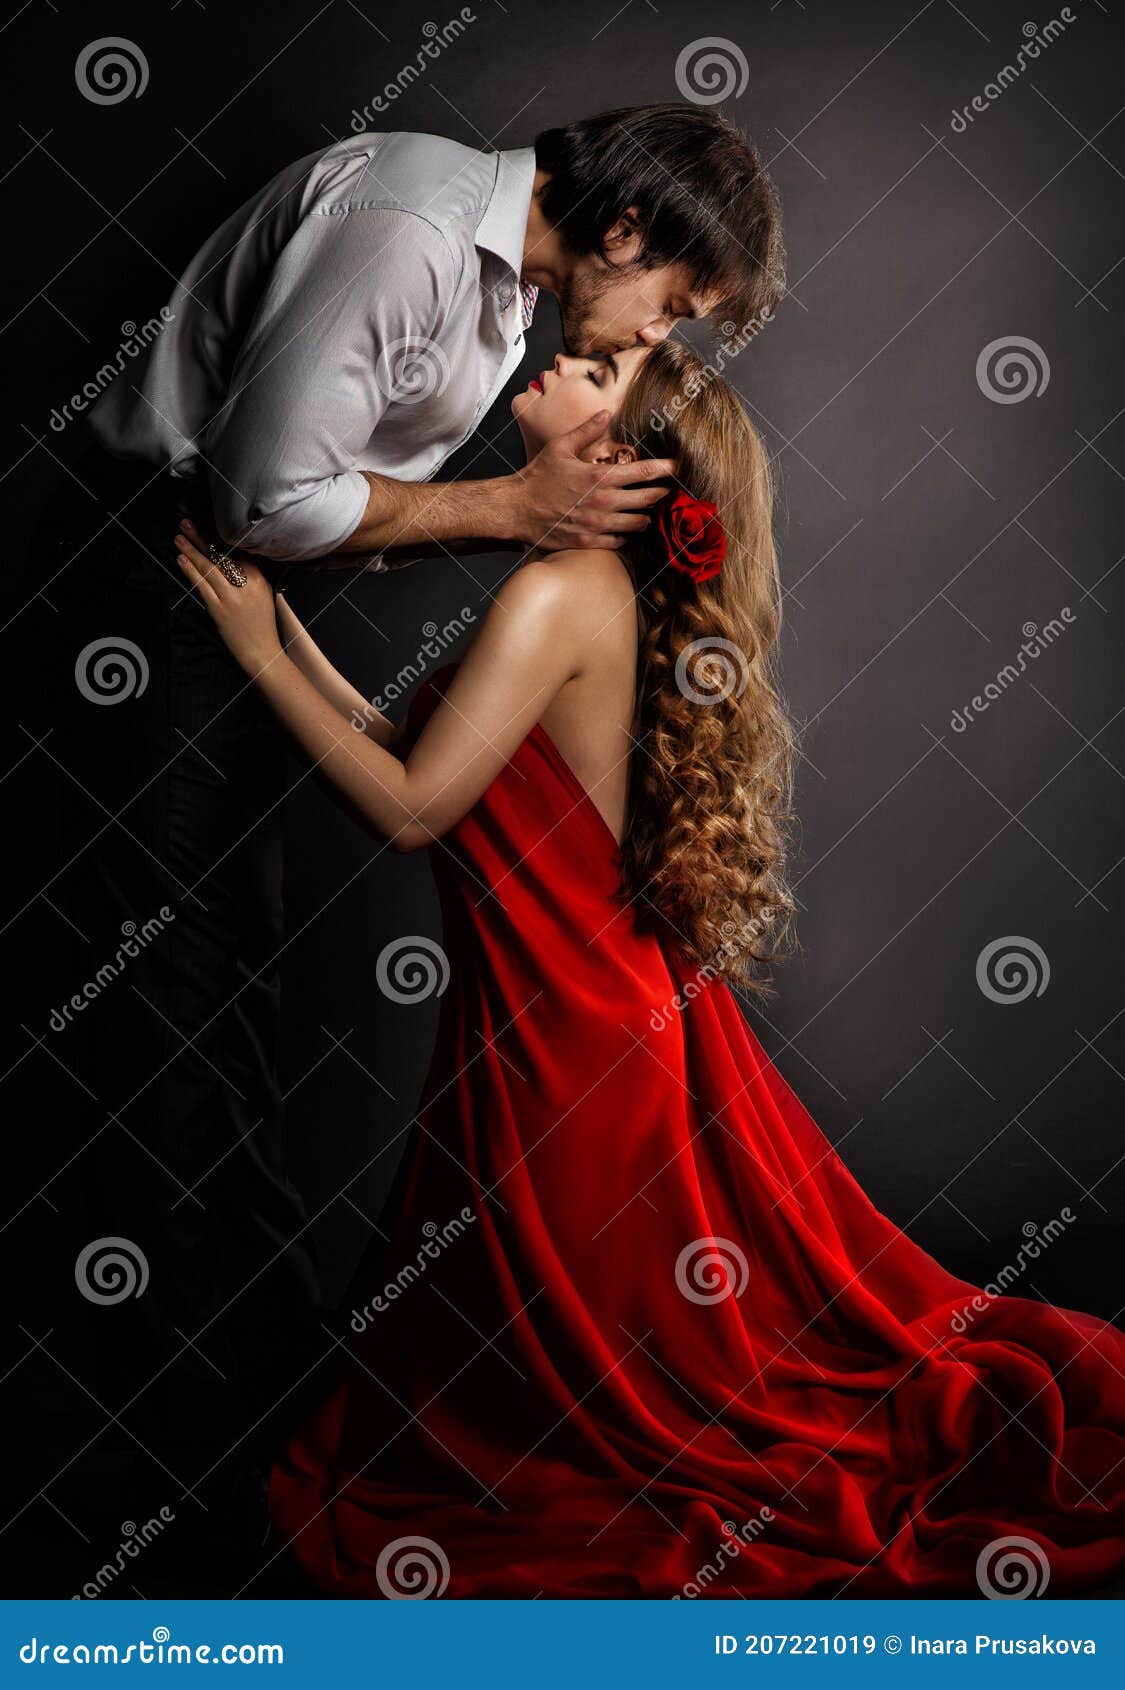 sensual couple kissing in love. handsome man hugging romantic woman in red dress. valentines people concept